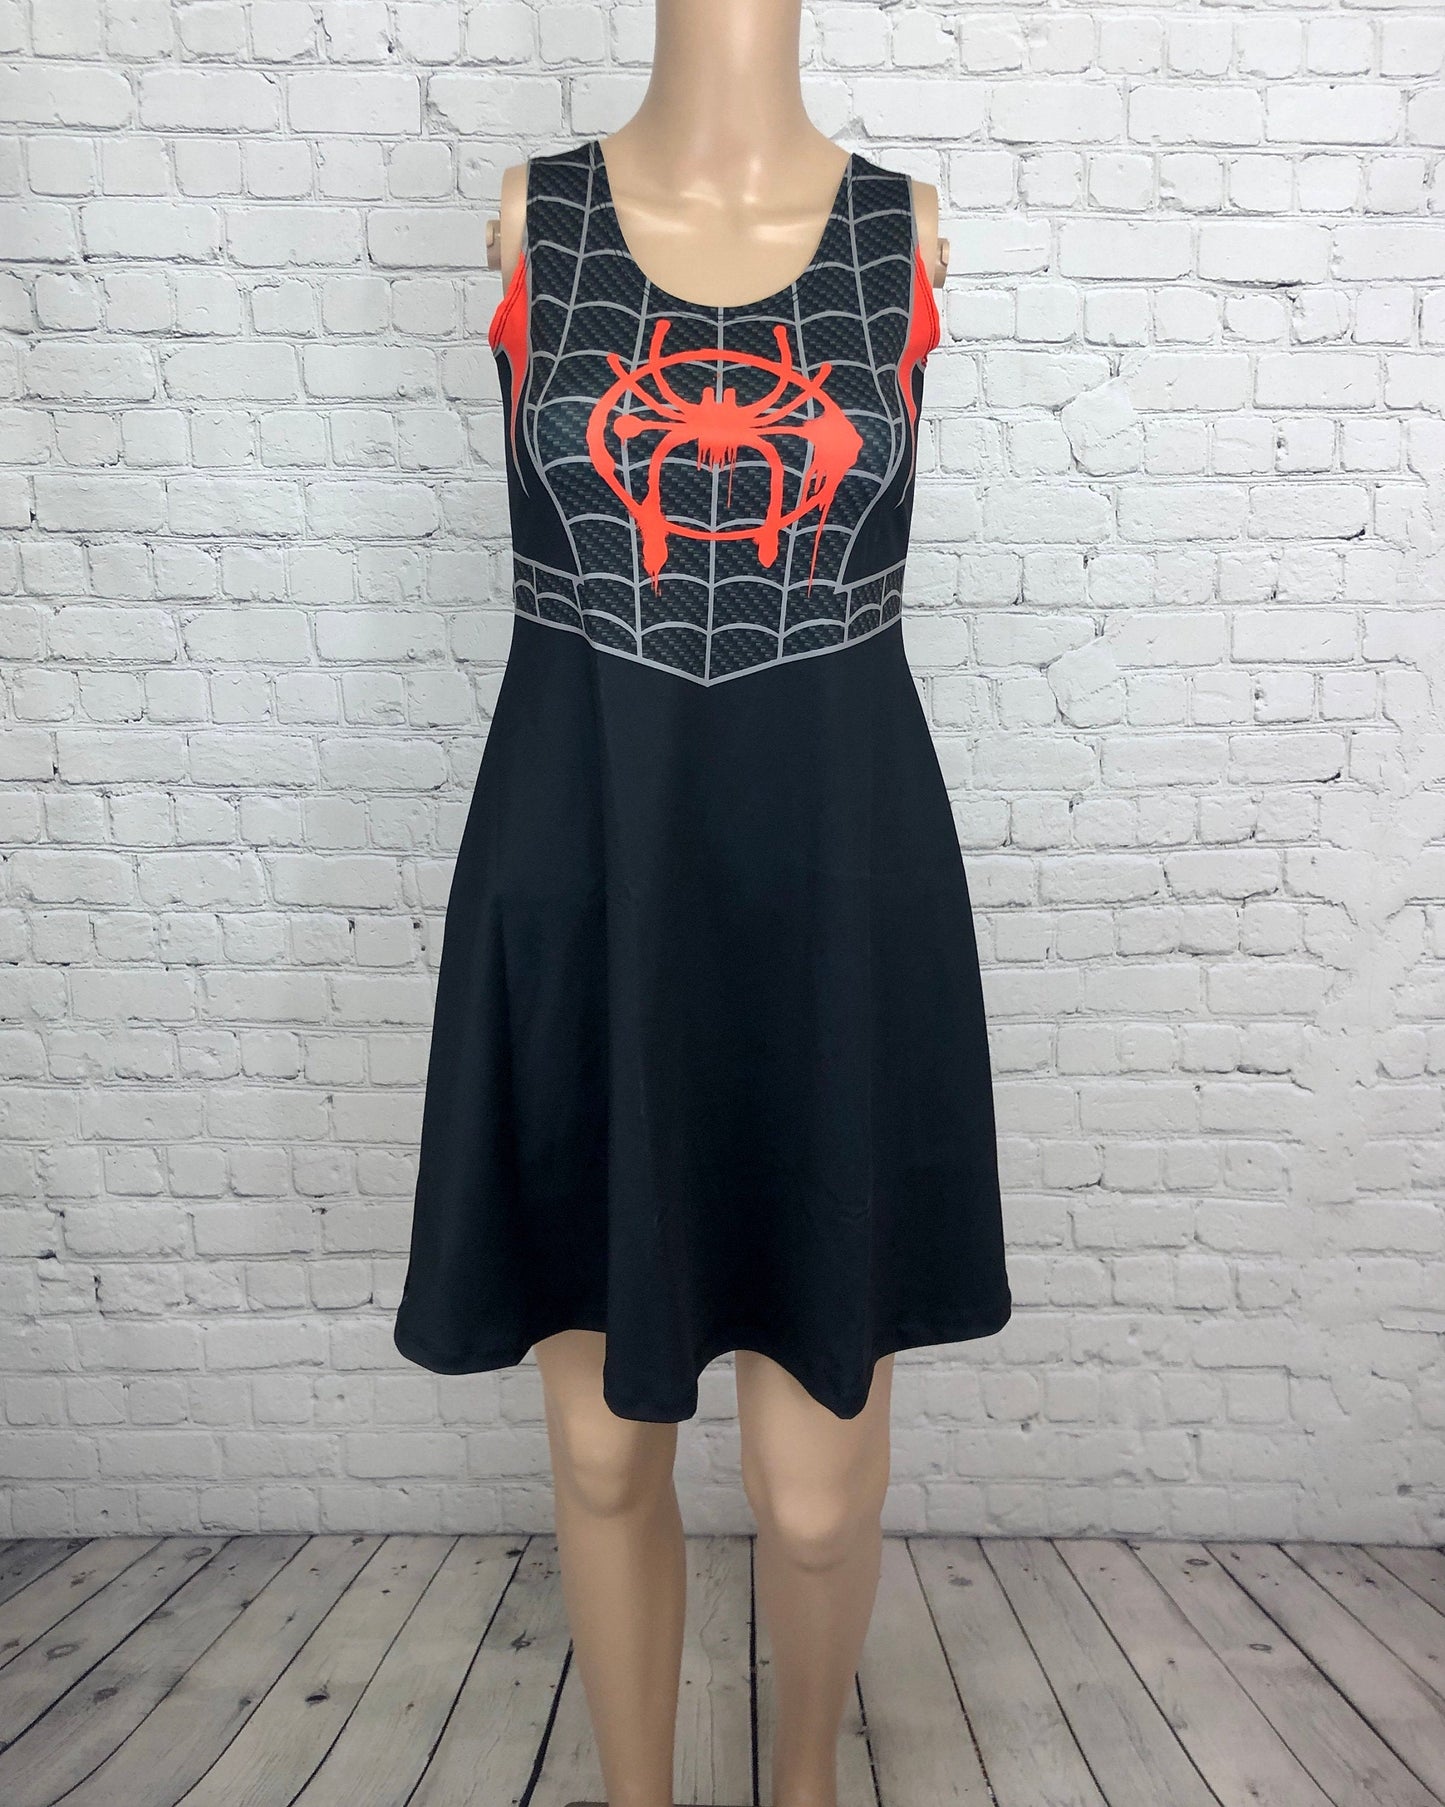 Miles Morales Into the Spider-Verse Inspired Sleeveless Dress